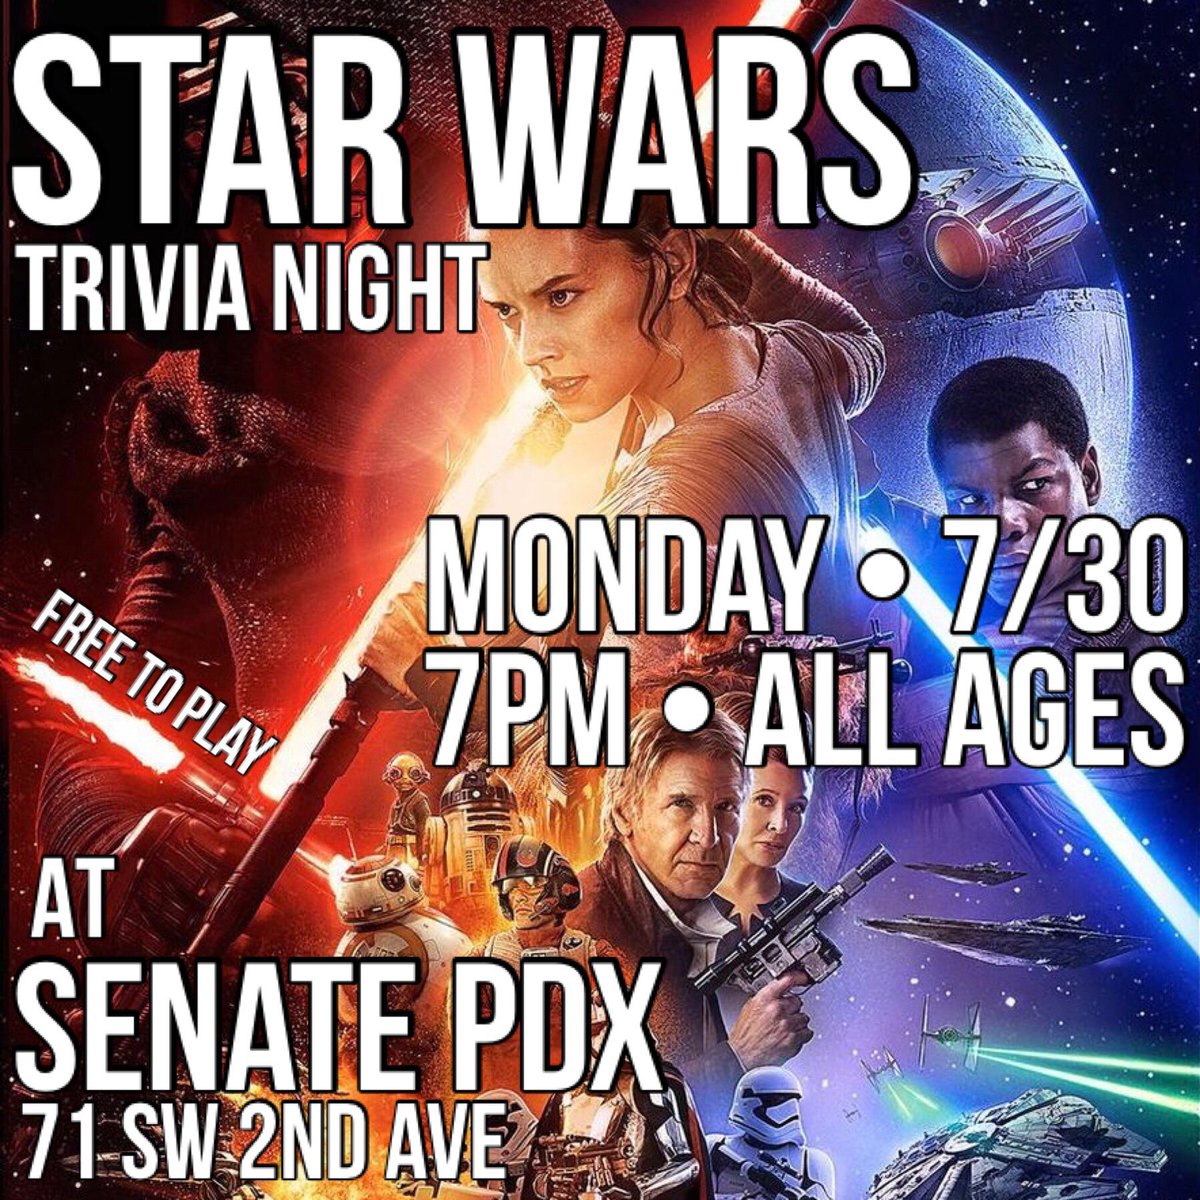 Star Wars is back! Join us on Monday, July 30th for test of your Star Wars knowledge & creativity at Senate in downtown Portland. Don’t forget to dress up for extra chances to win!
#StarWars #SenatePDX #DowntownPortland #PDX #Portland #Stumptown #PNW #Beaverton #Trivia